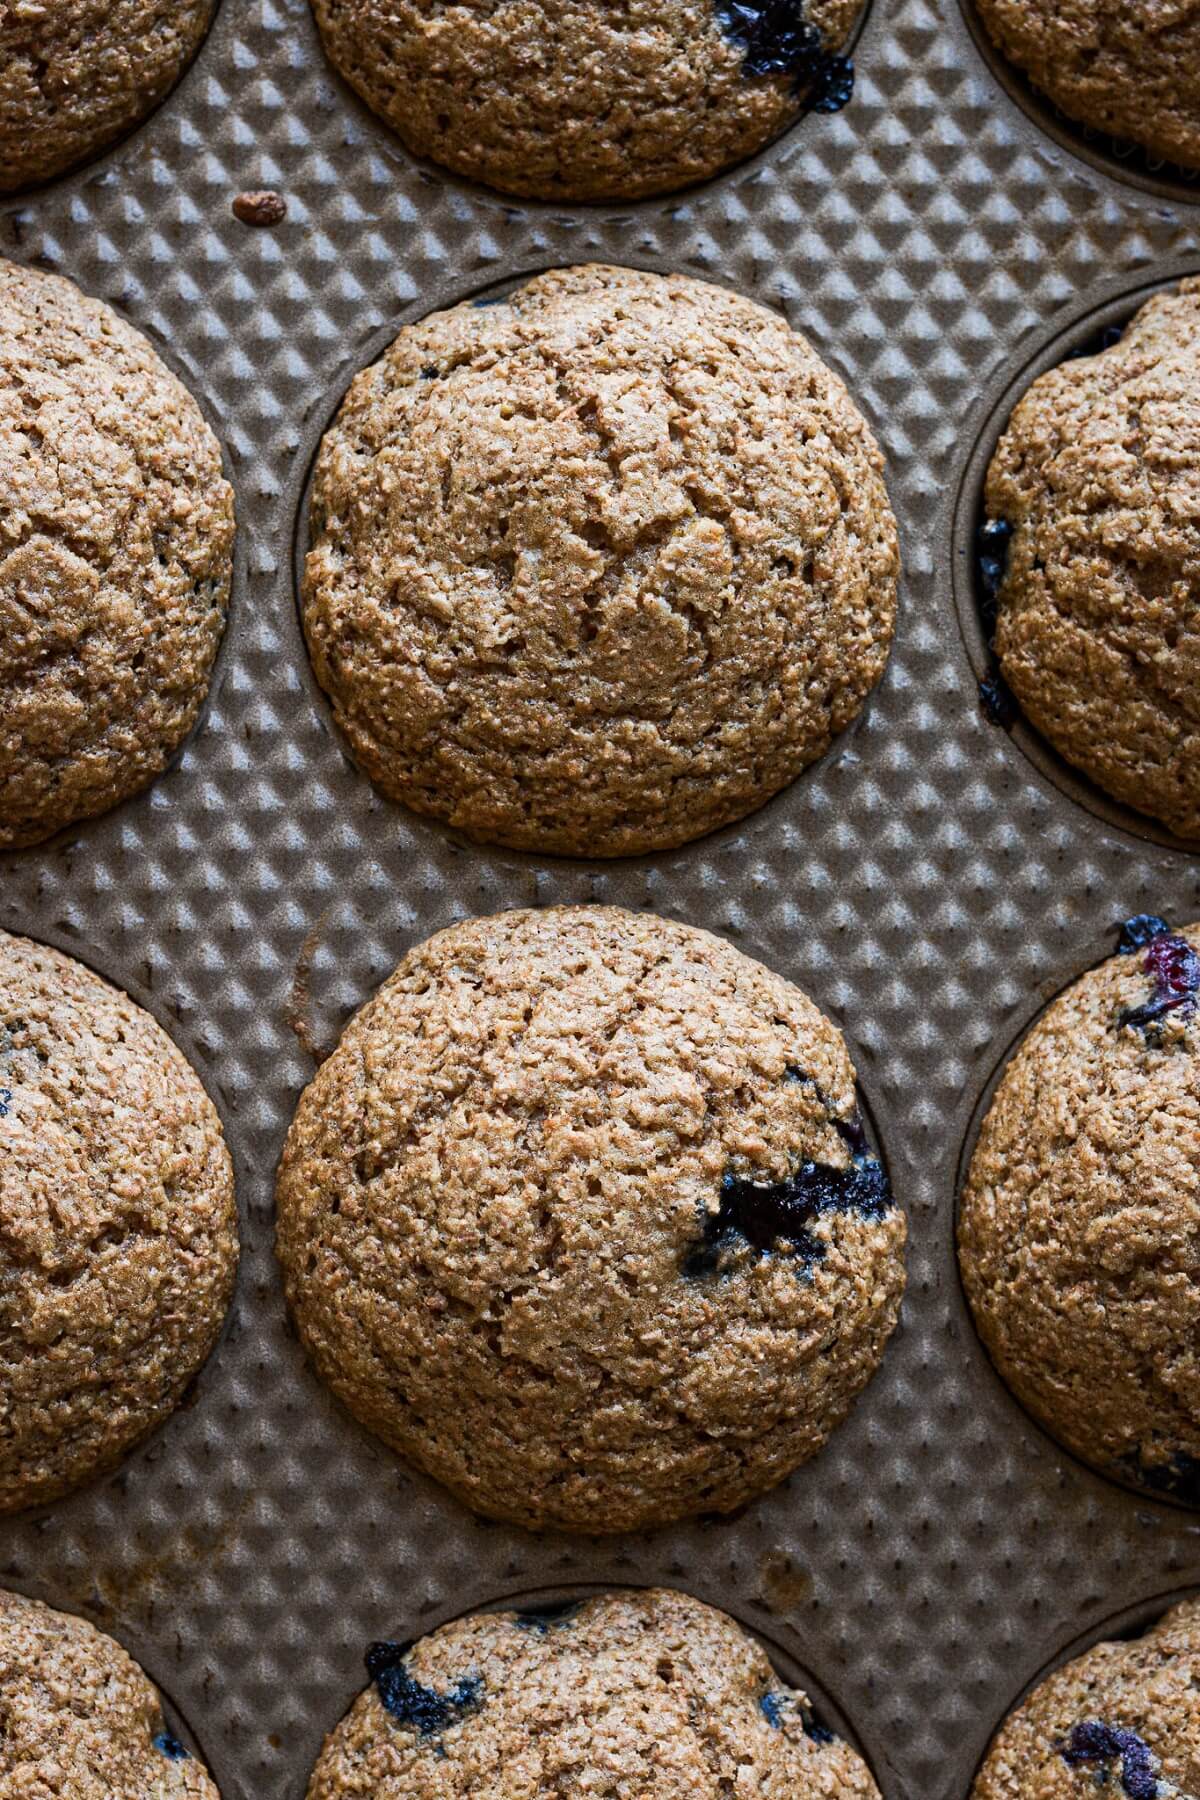 Maple blueberry bran muffins in a muffin pan.